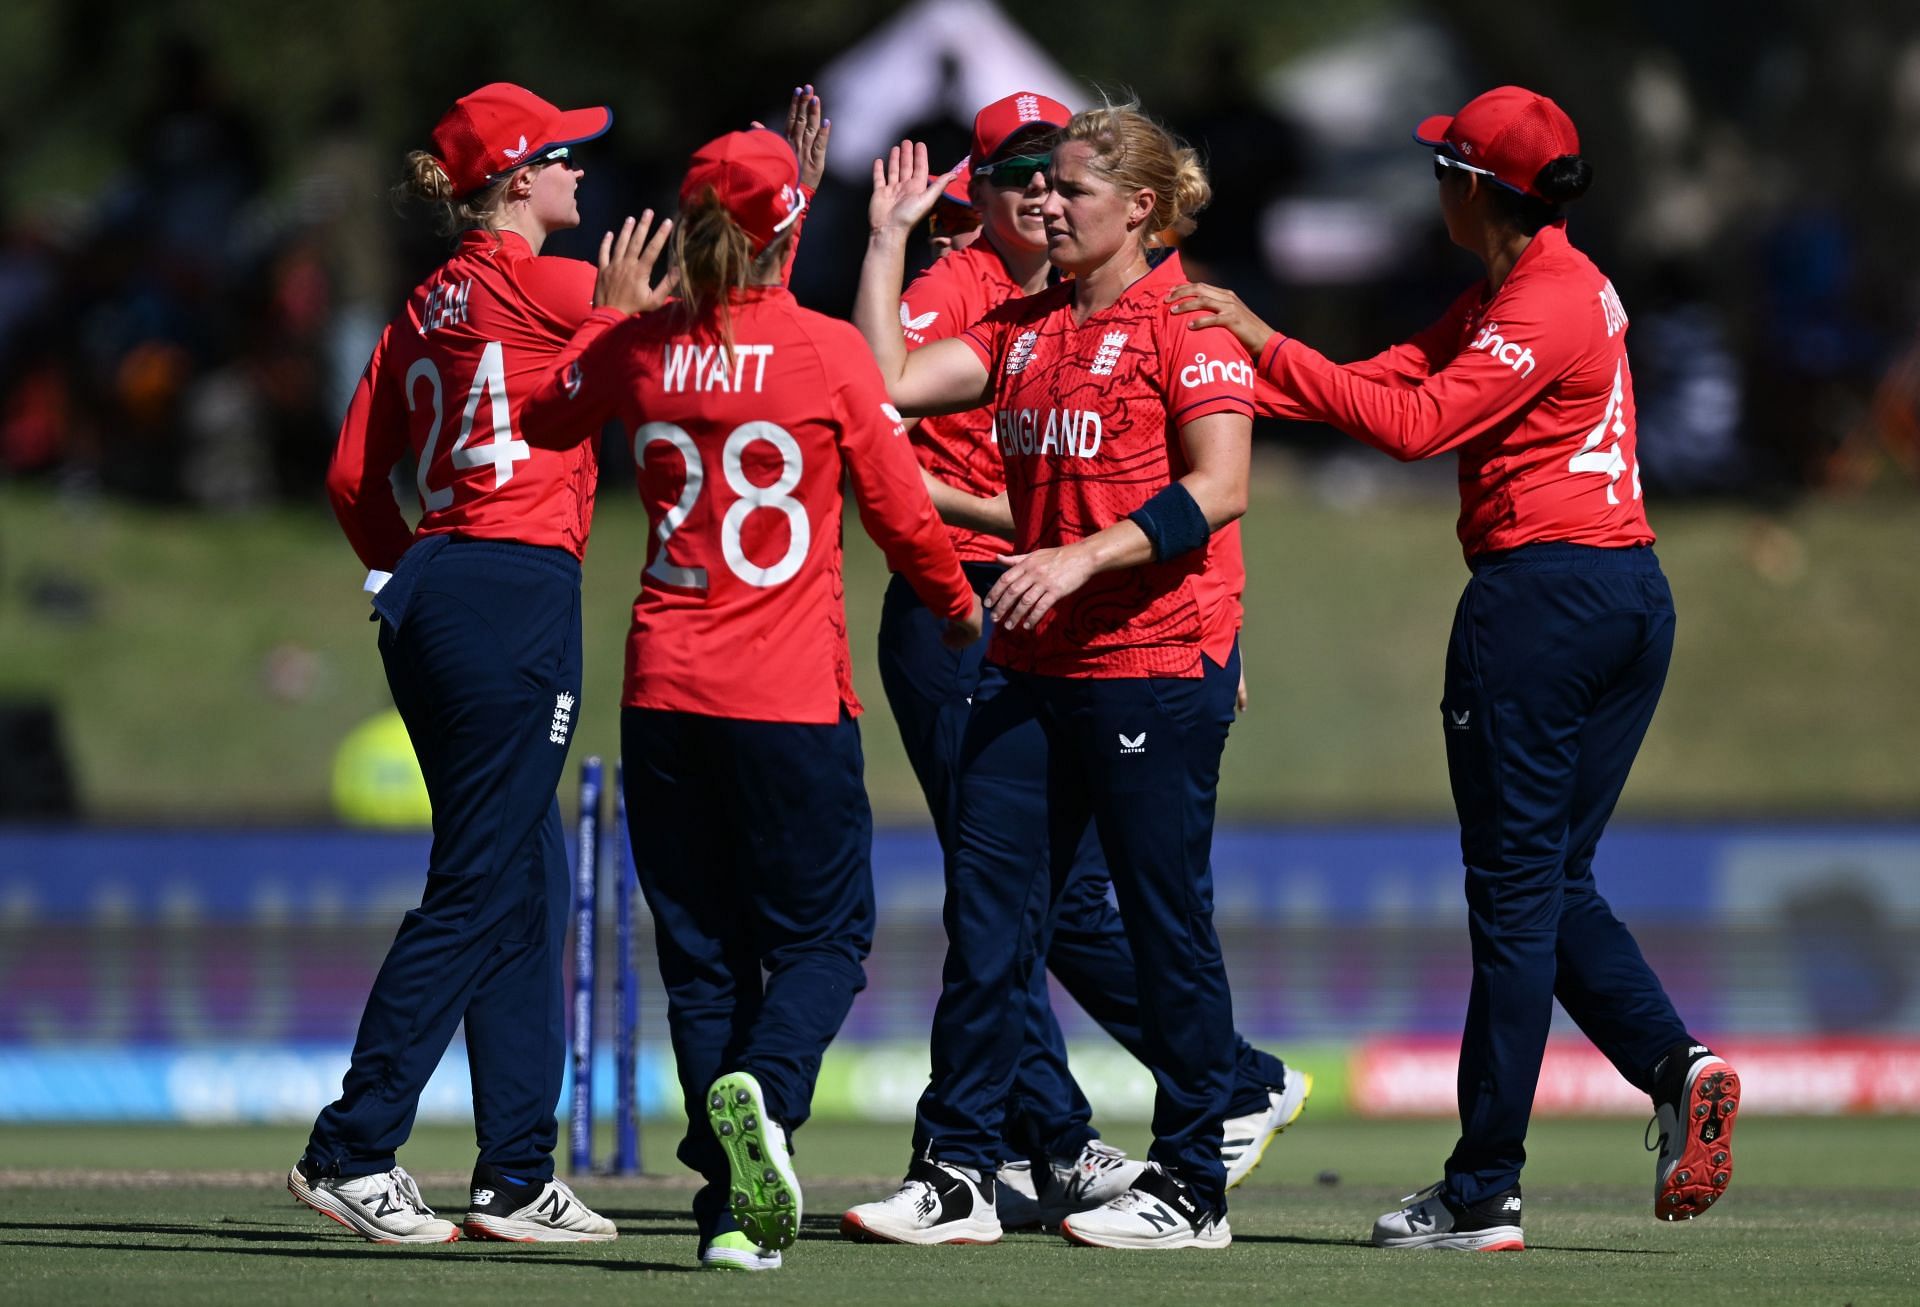 IRE-W vs ENG-W Boland Park, Paarl weather report for Womens T20 World Cup Match 6